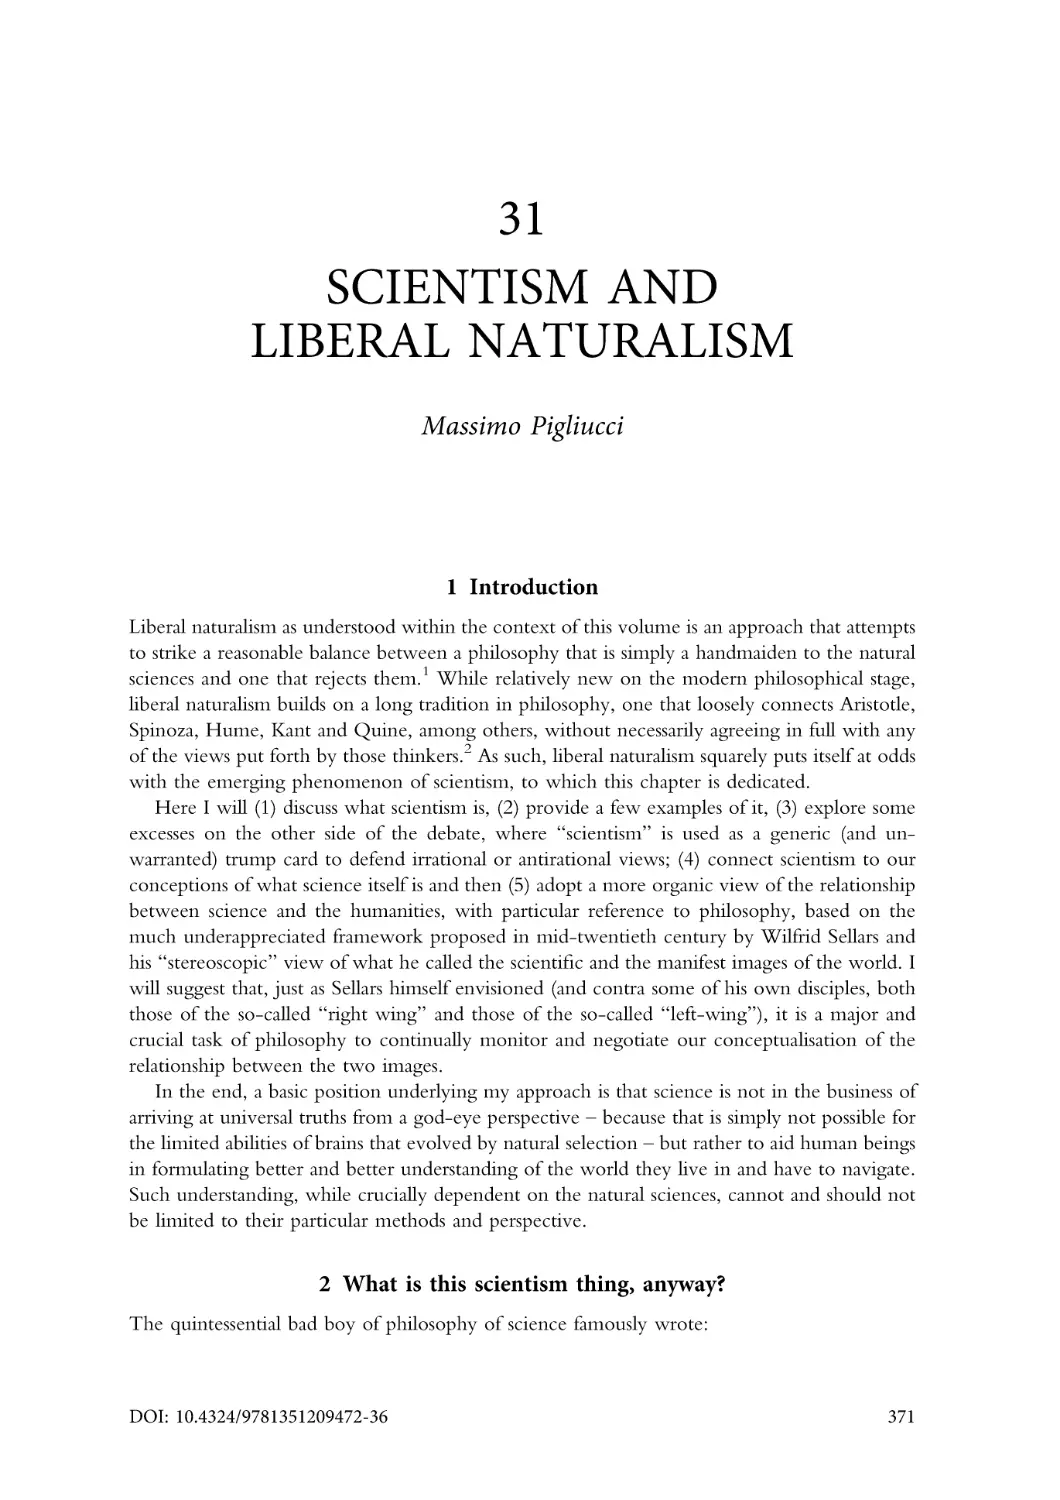 31. Scientism and liberal naturalism
1. Introduction
2. What is this scientism thing, anyway?